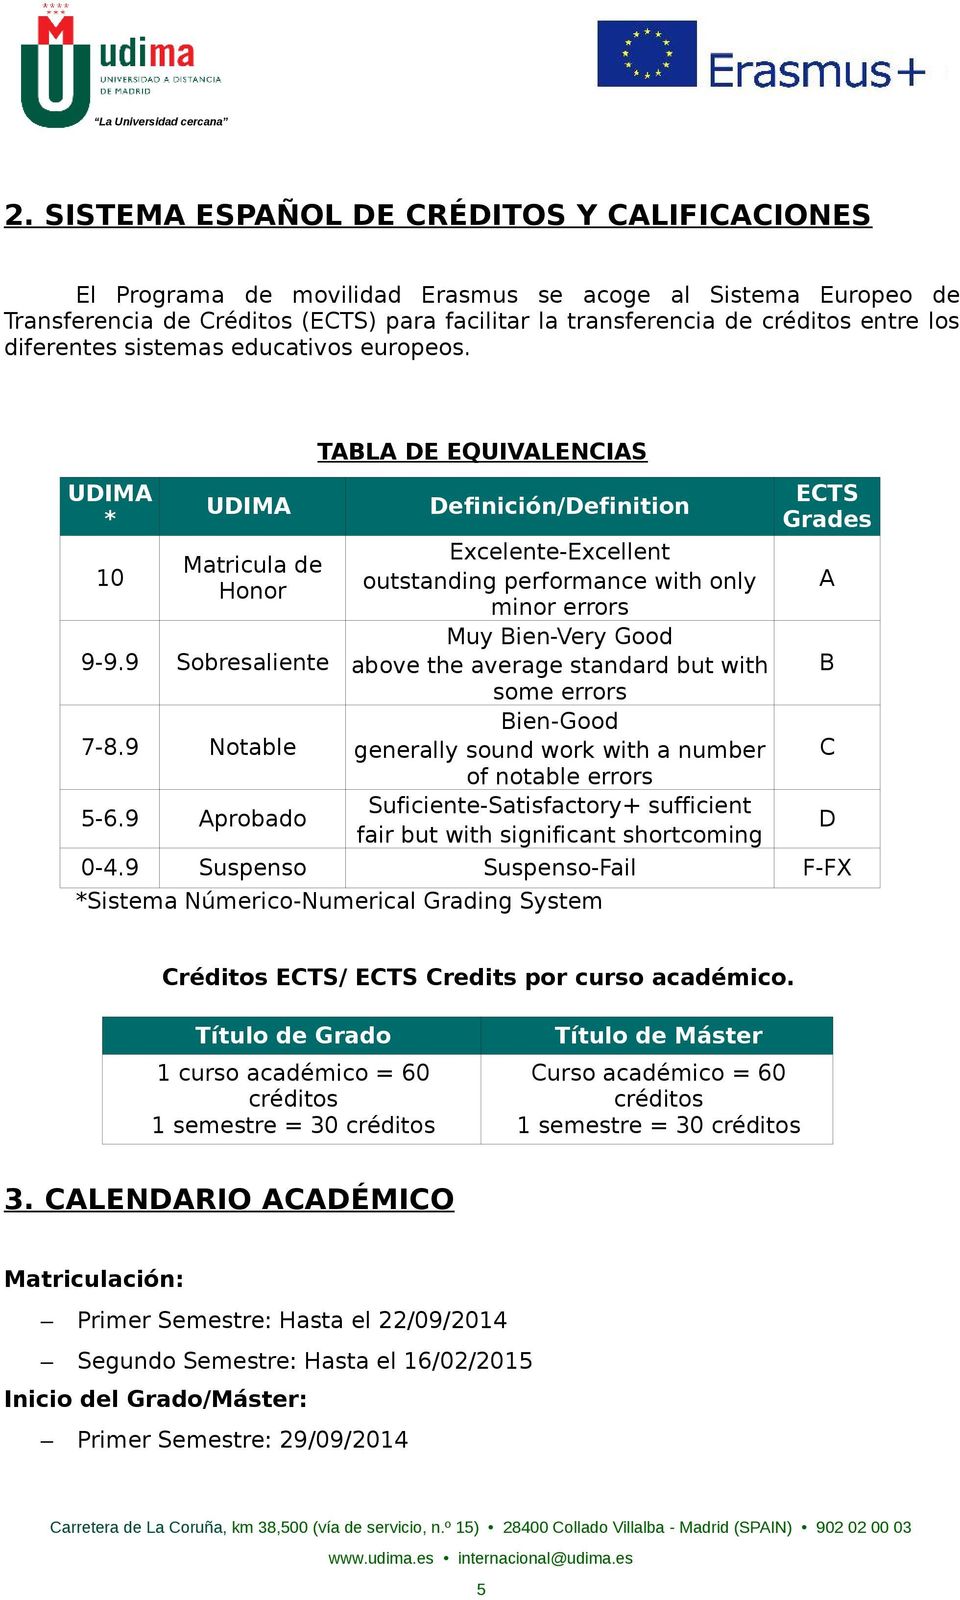 9 Aprobado TABLA DE EQUIVALENCIAS Definición/Definition Excelente-Excellent outstanding performance with only minor errors Muy Bien-Very Good above the average standard but with some errors Bien-Good